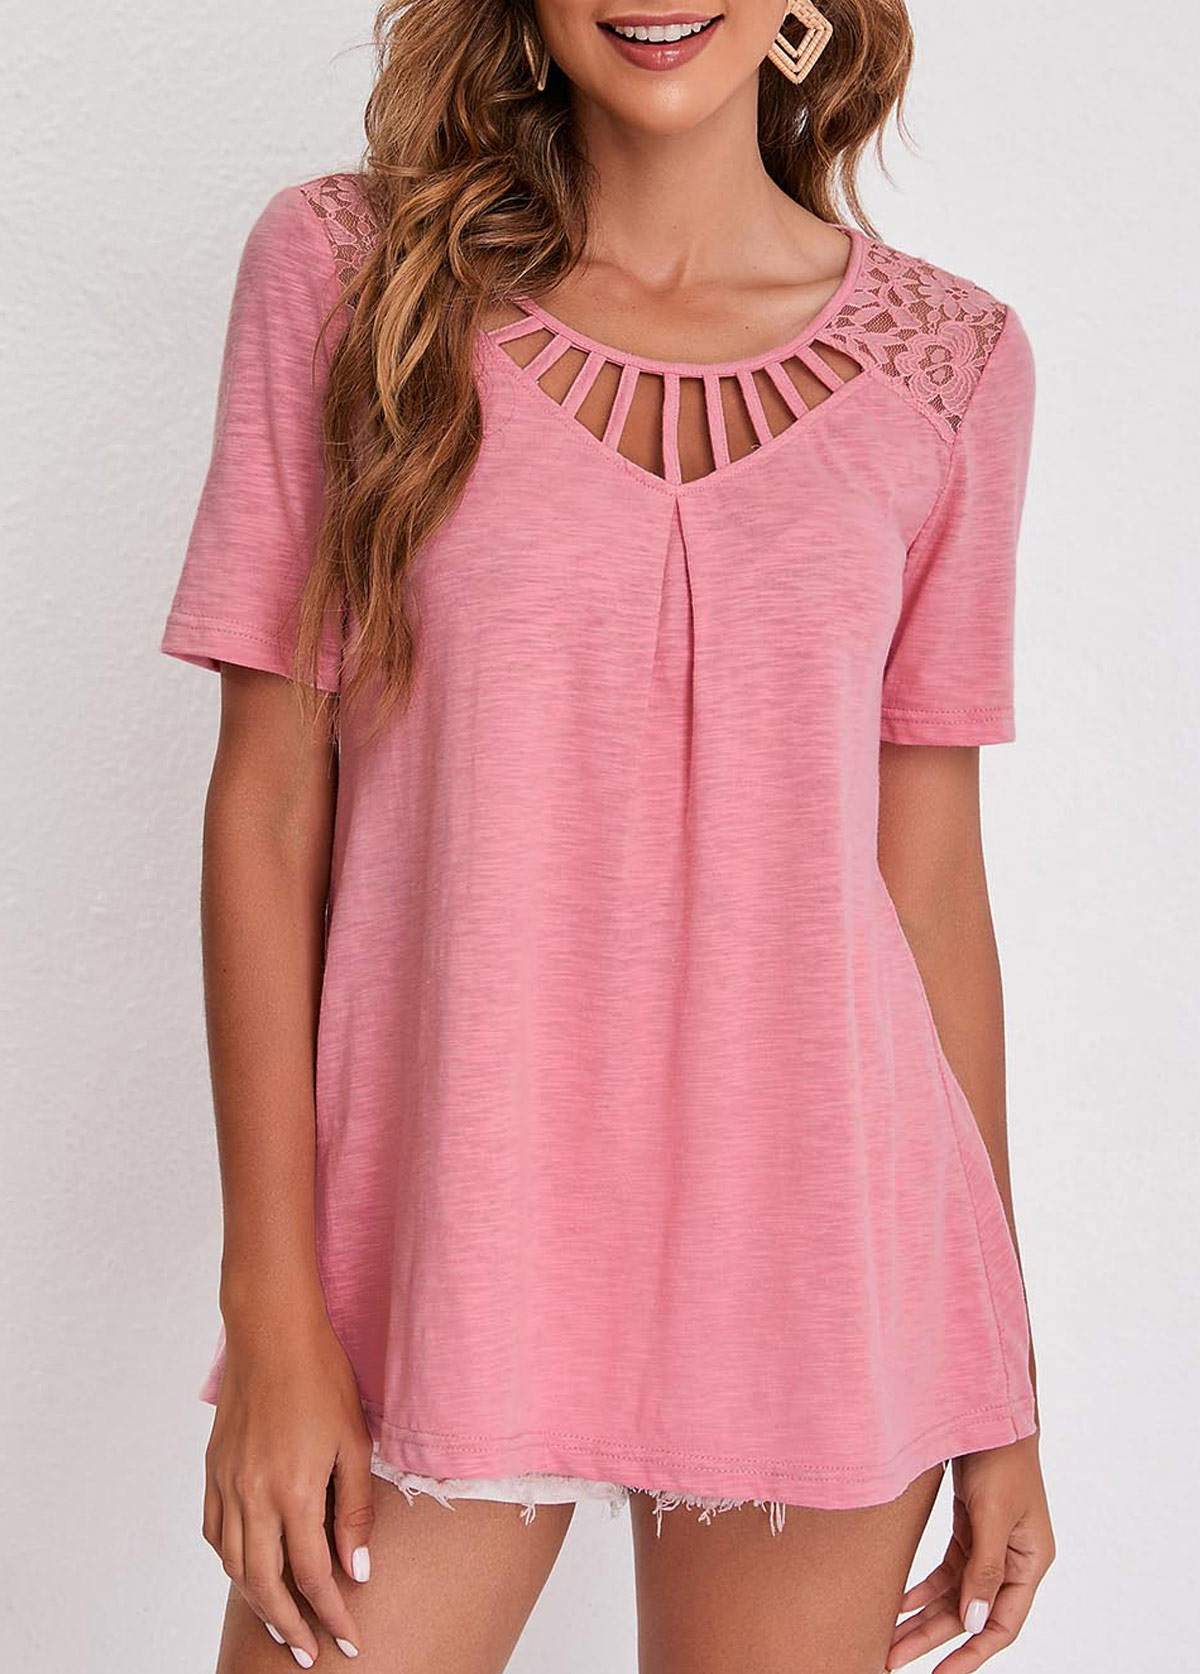 Lace Patchwork Pink Cage Neck T Shirt